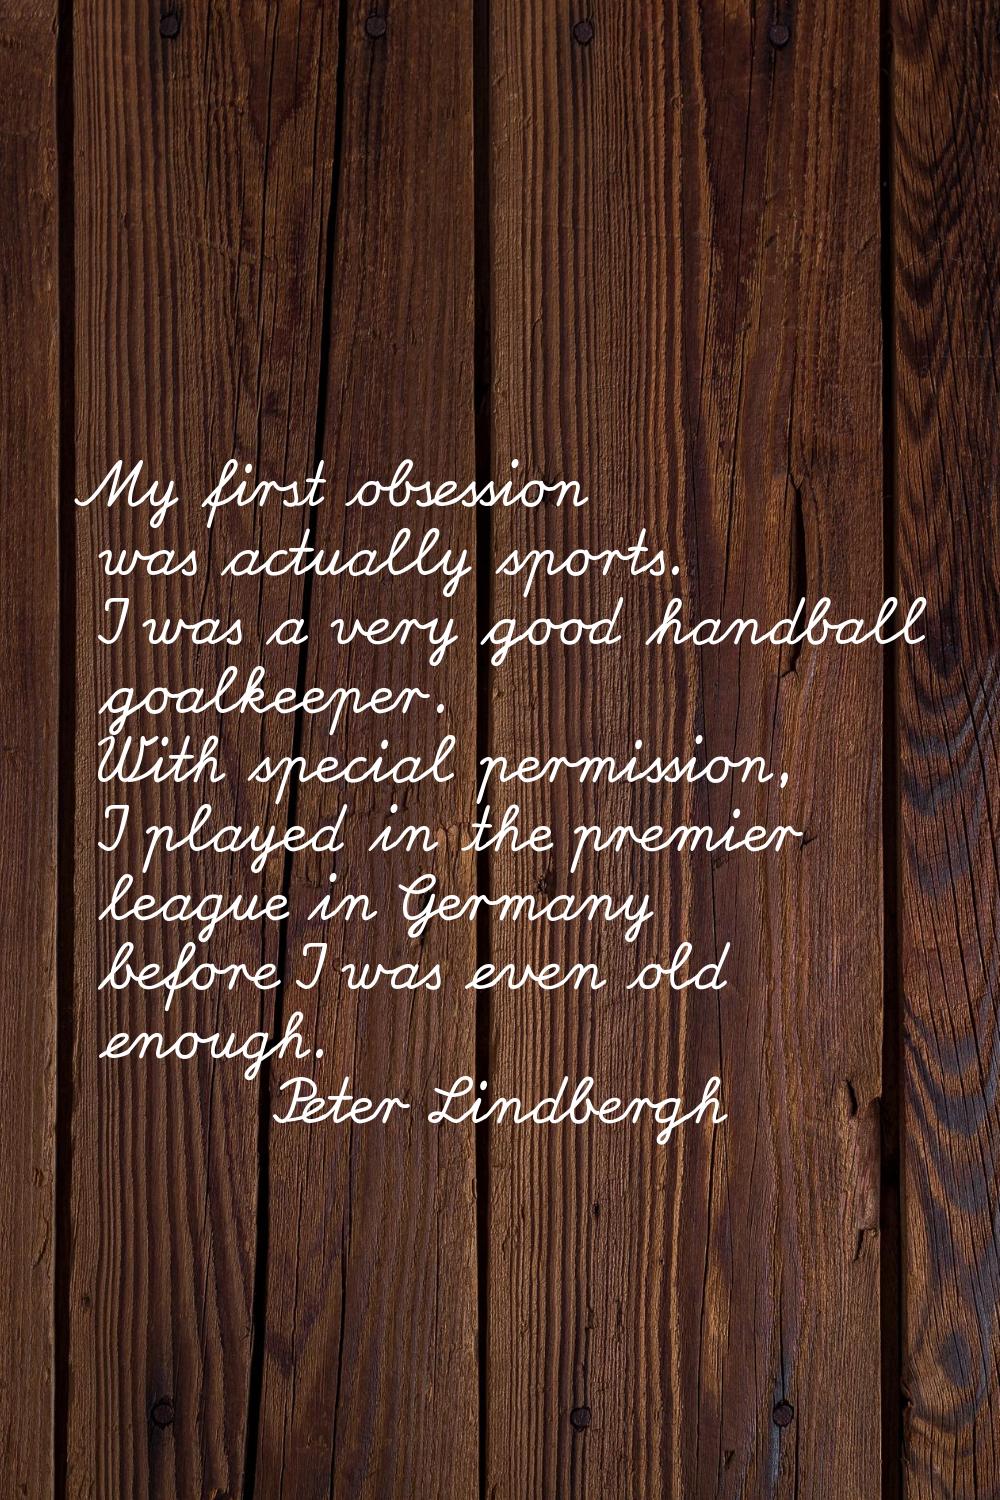 My first obsession was actually sports. I was a very good handball goalkeeper. With special permiss